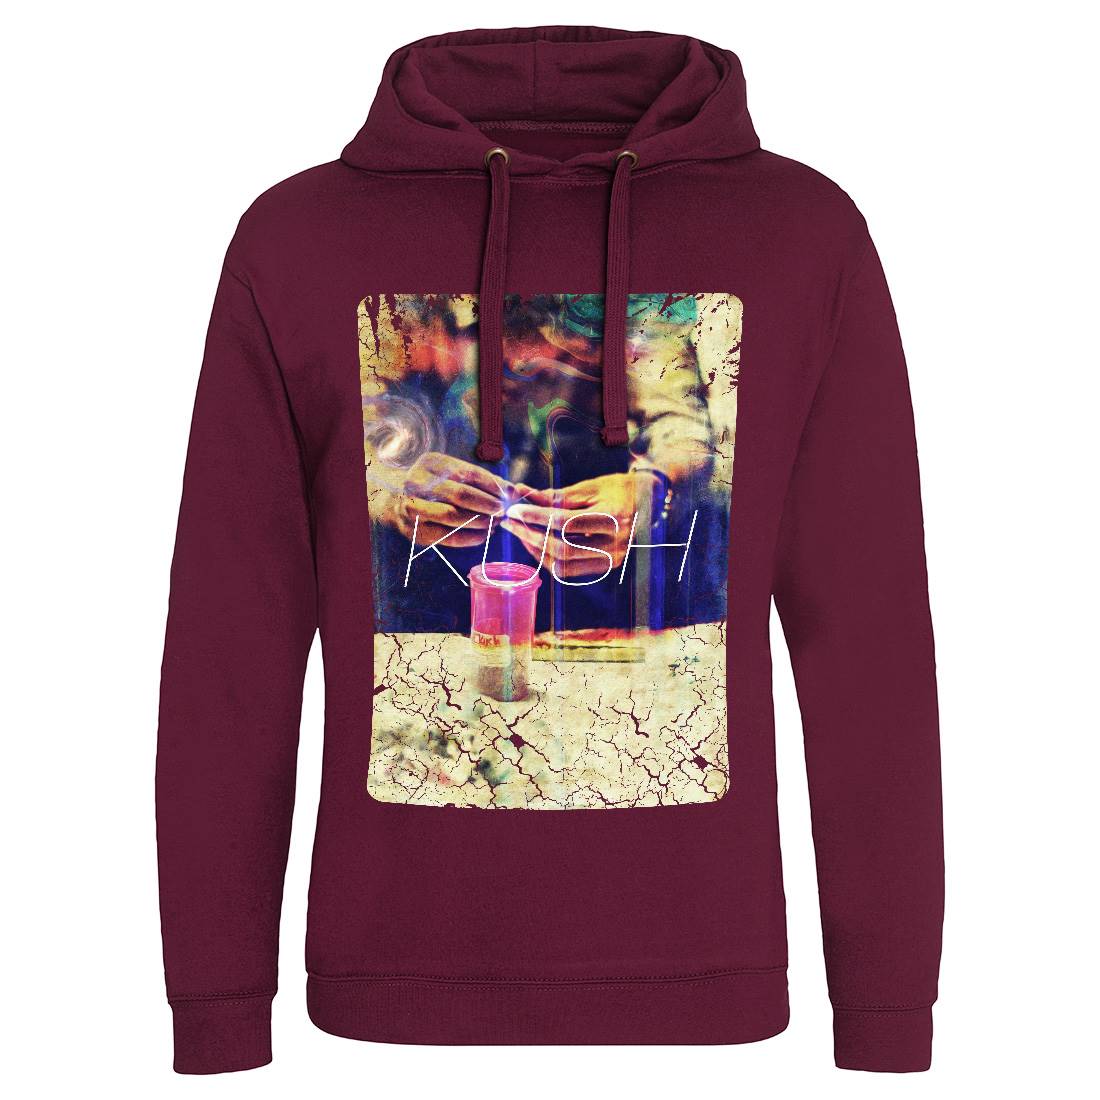 Kush Trippin Mens Hoodie Without Pocket Drugs A857